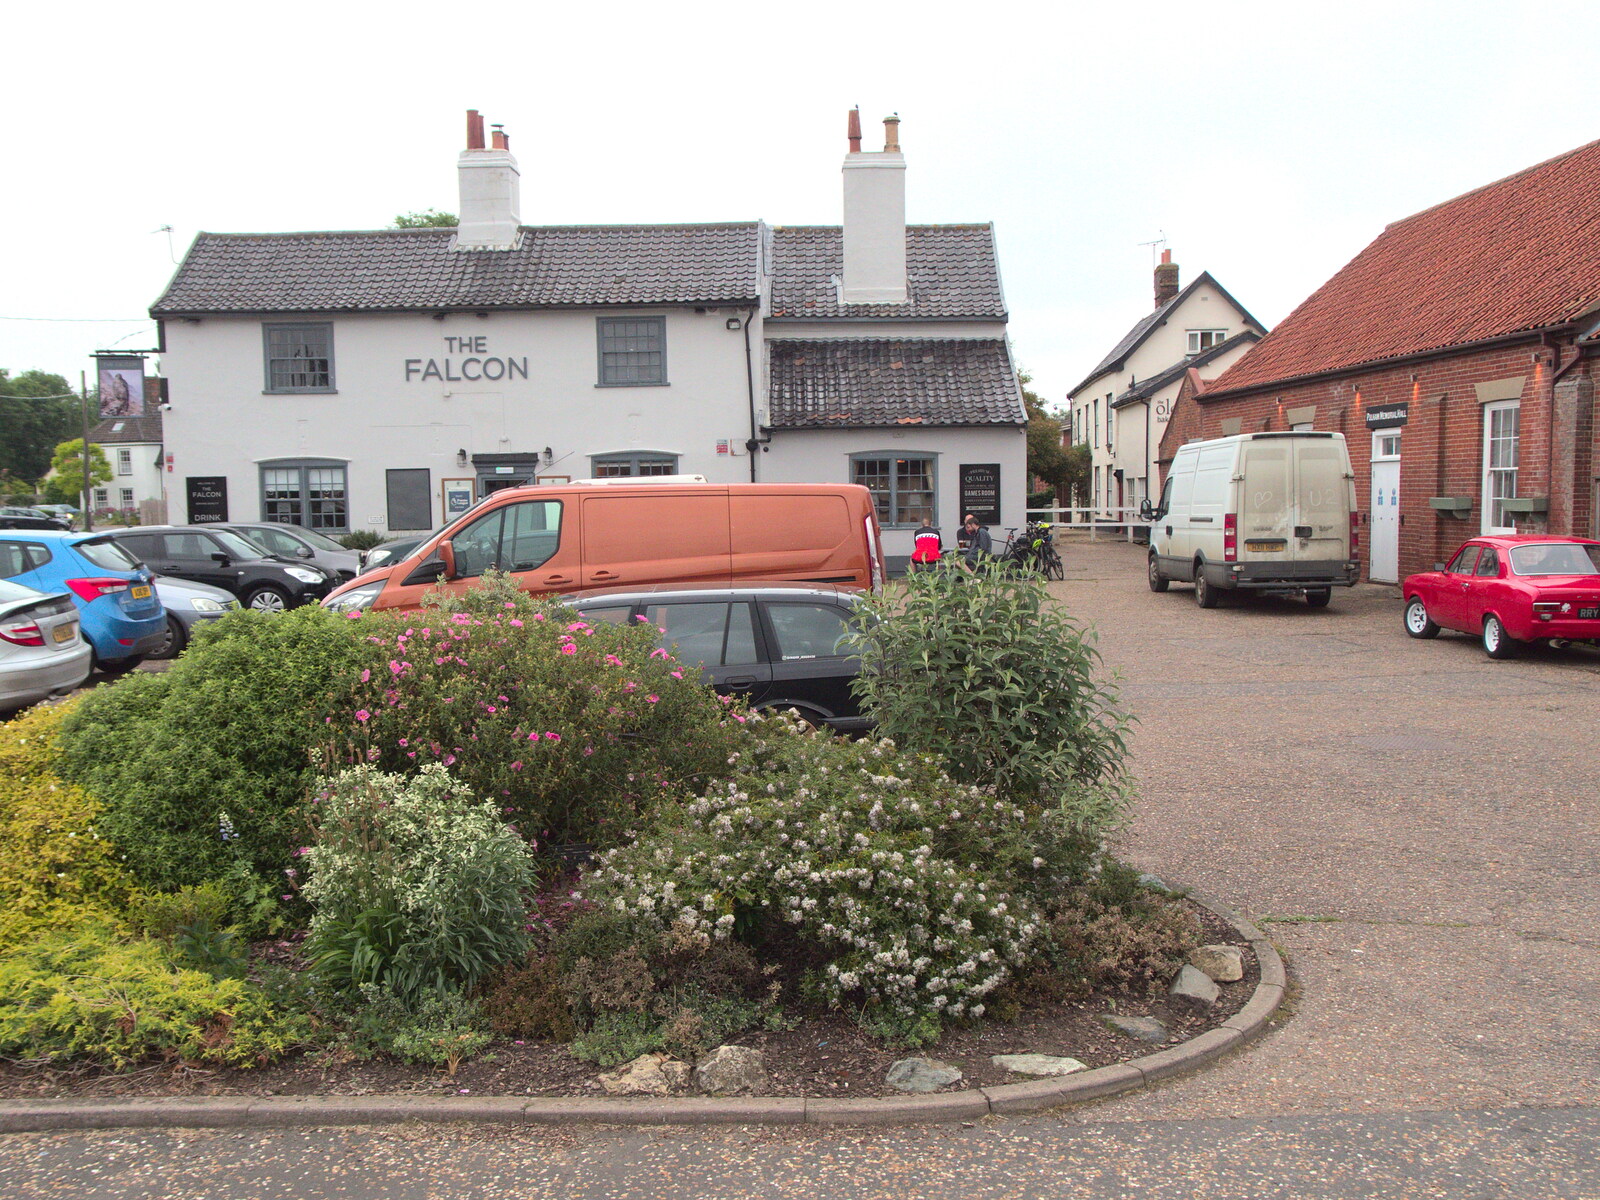 The Falcon pub in Pulham from A BSCC Ride to Pulham Market, Norfolk - 17th June 2021